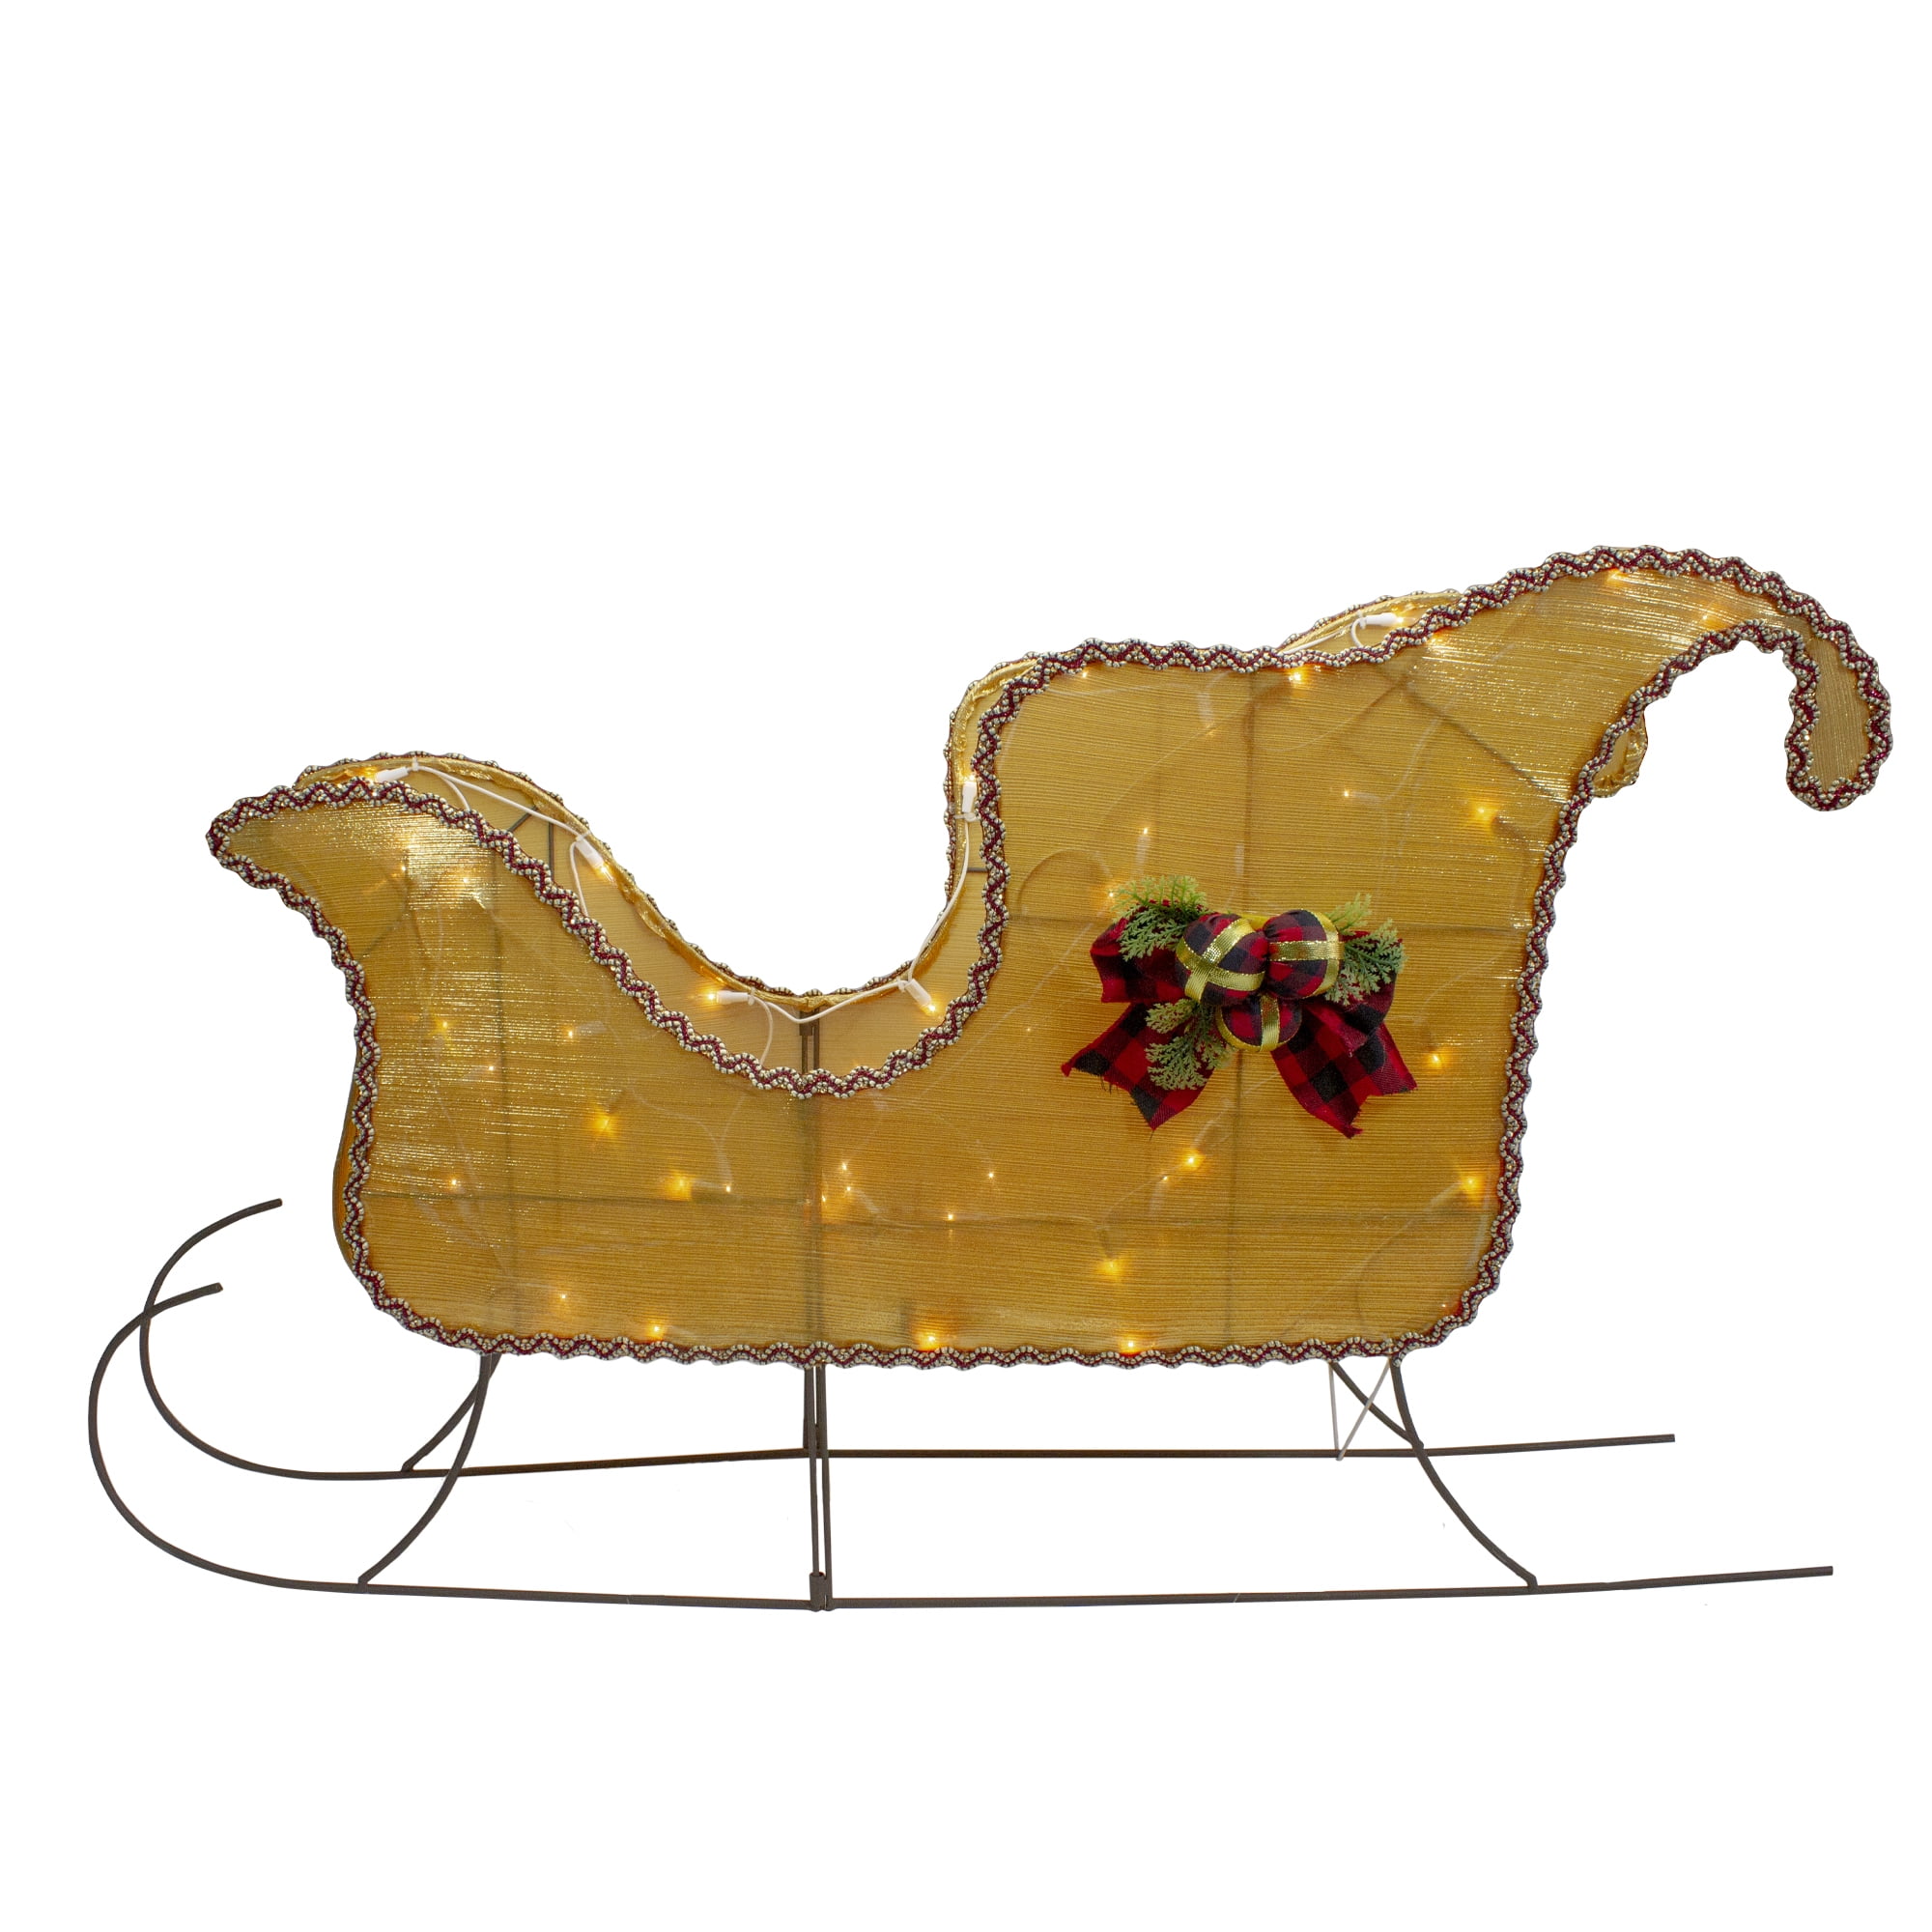 Northlight Lighted Gold Shiny Christmas Sleigh Outdoor Yard Decoration ...